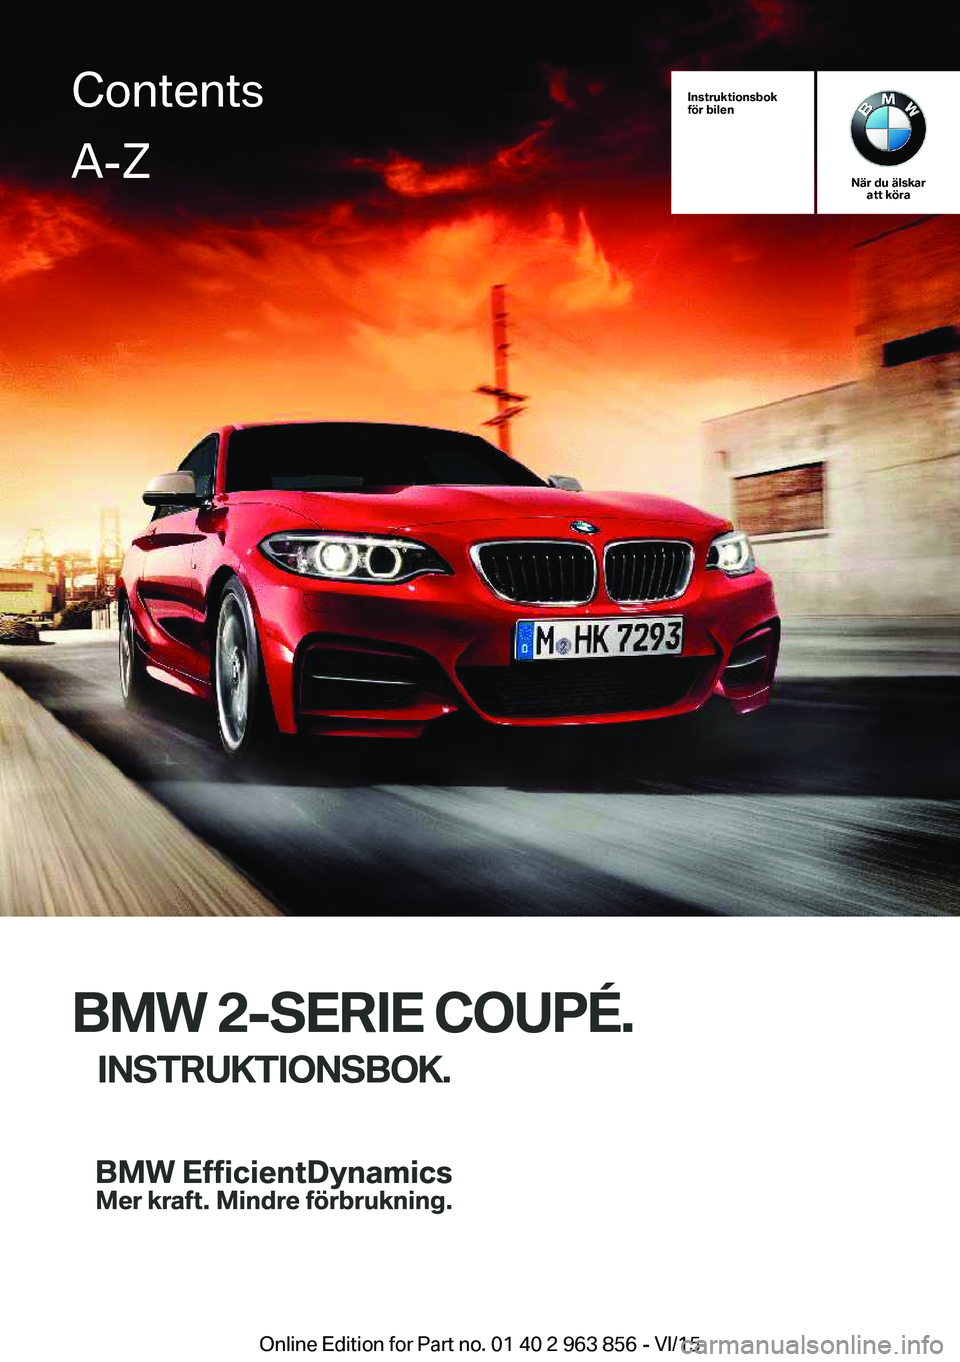 BMW 2 SERIES COUPE 2016  InstruktionsbÖcker (in Swedish) 